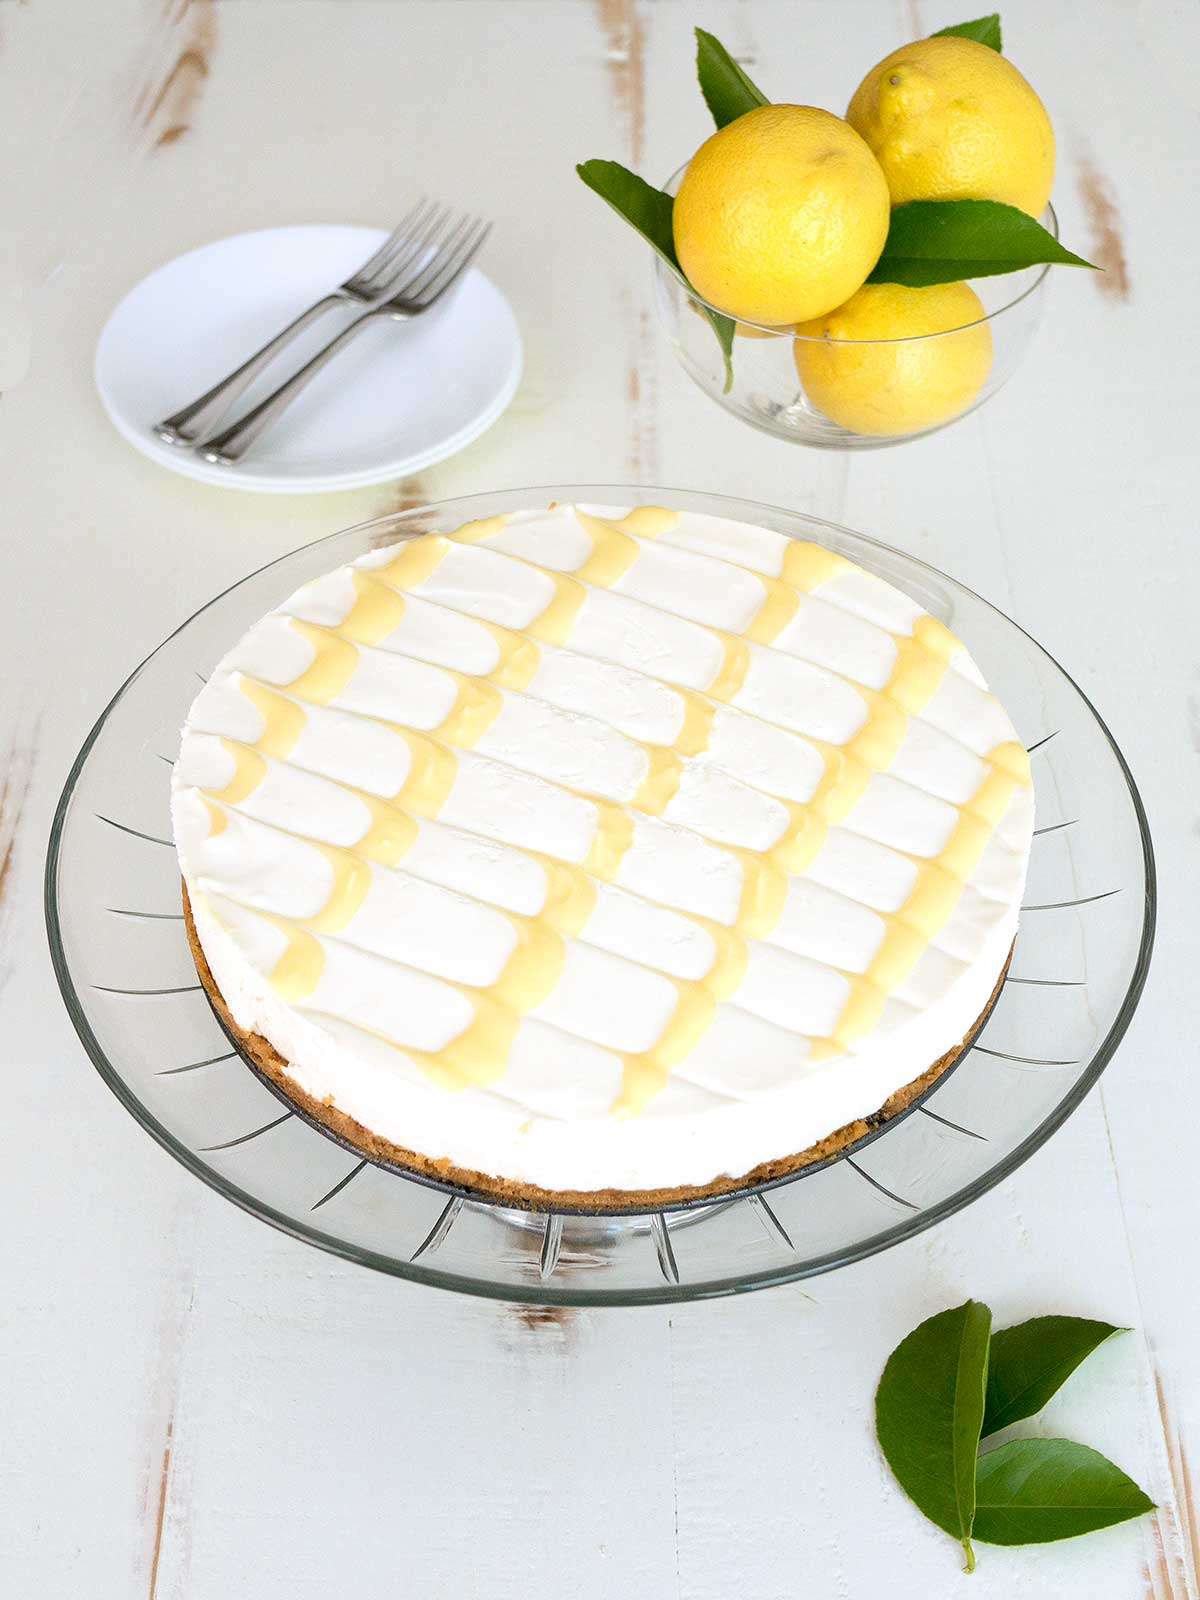 Cheesecake Topped with Lemon Curd on Glass Plate.